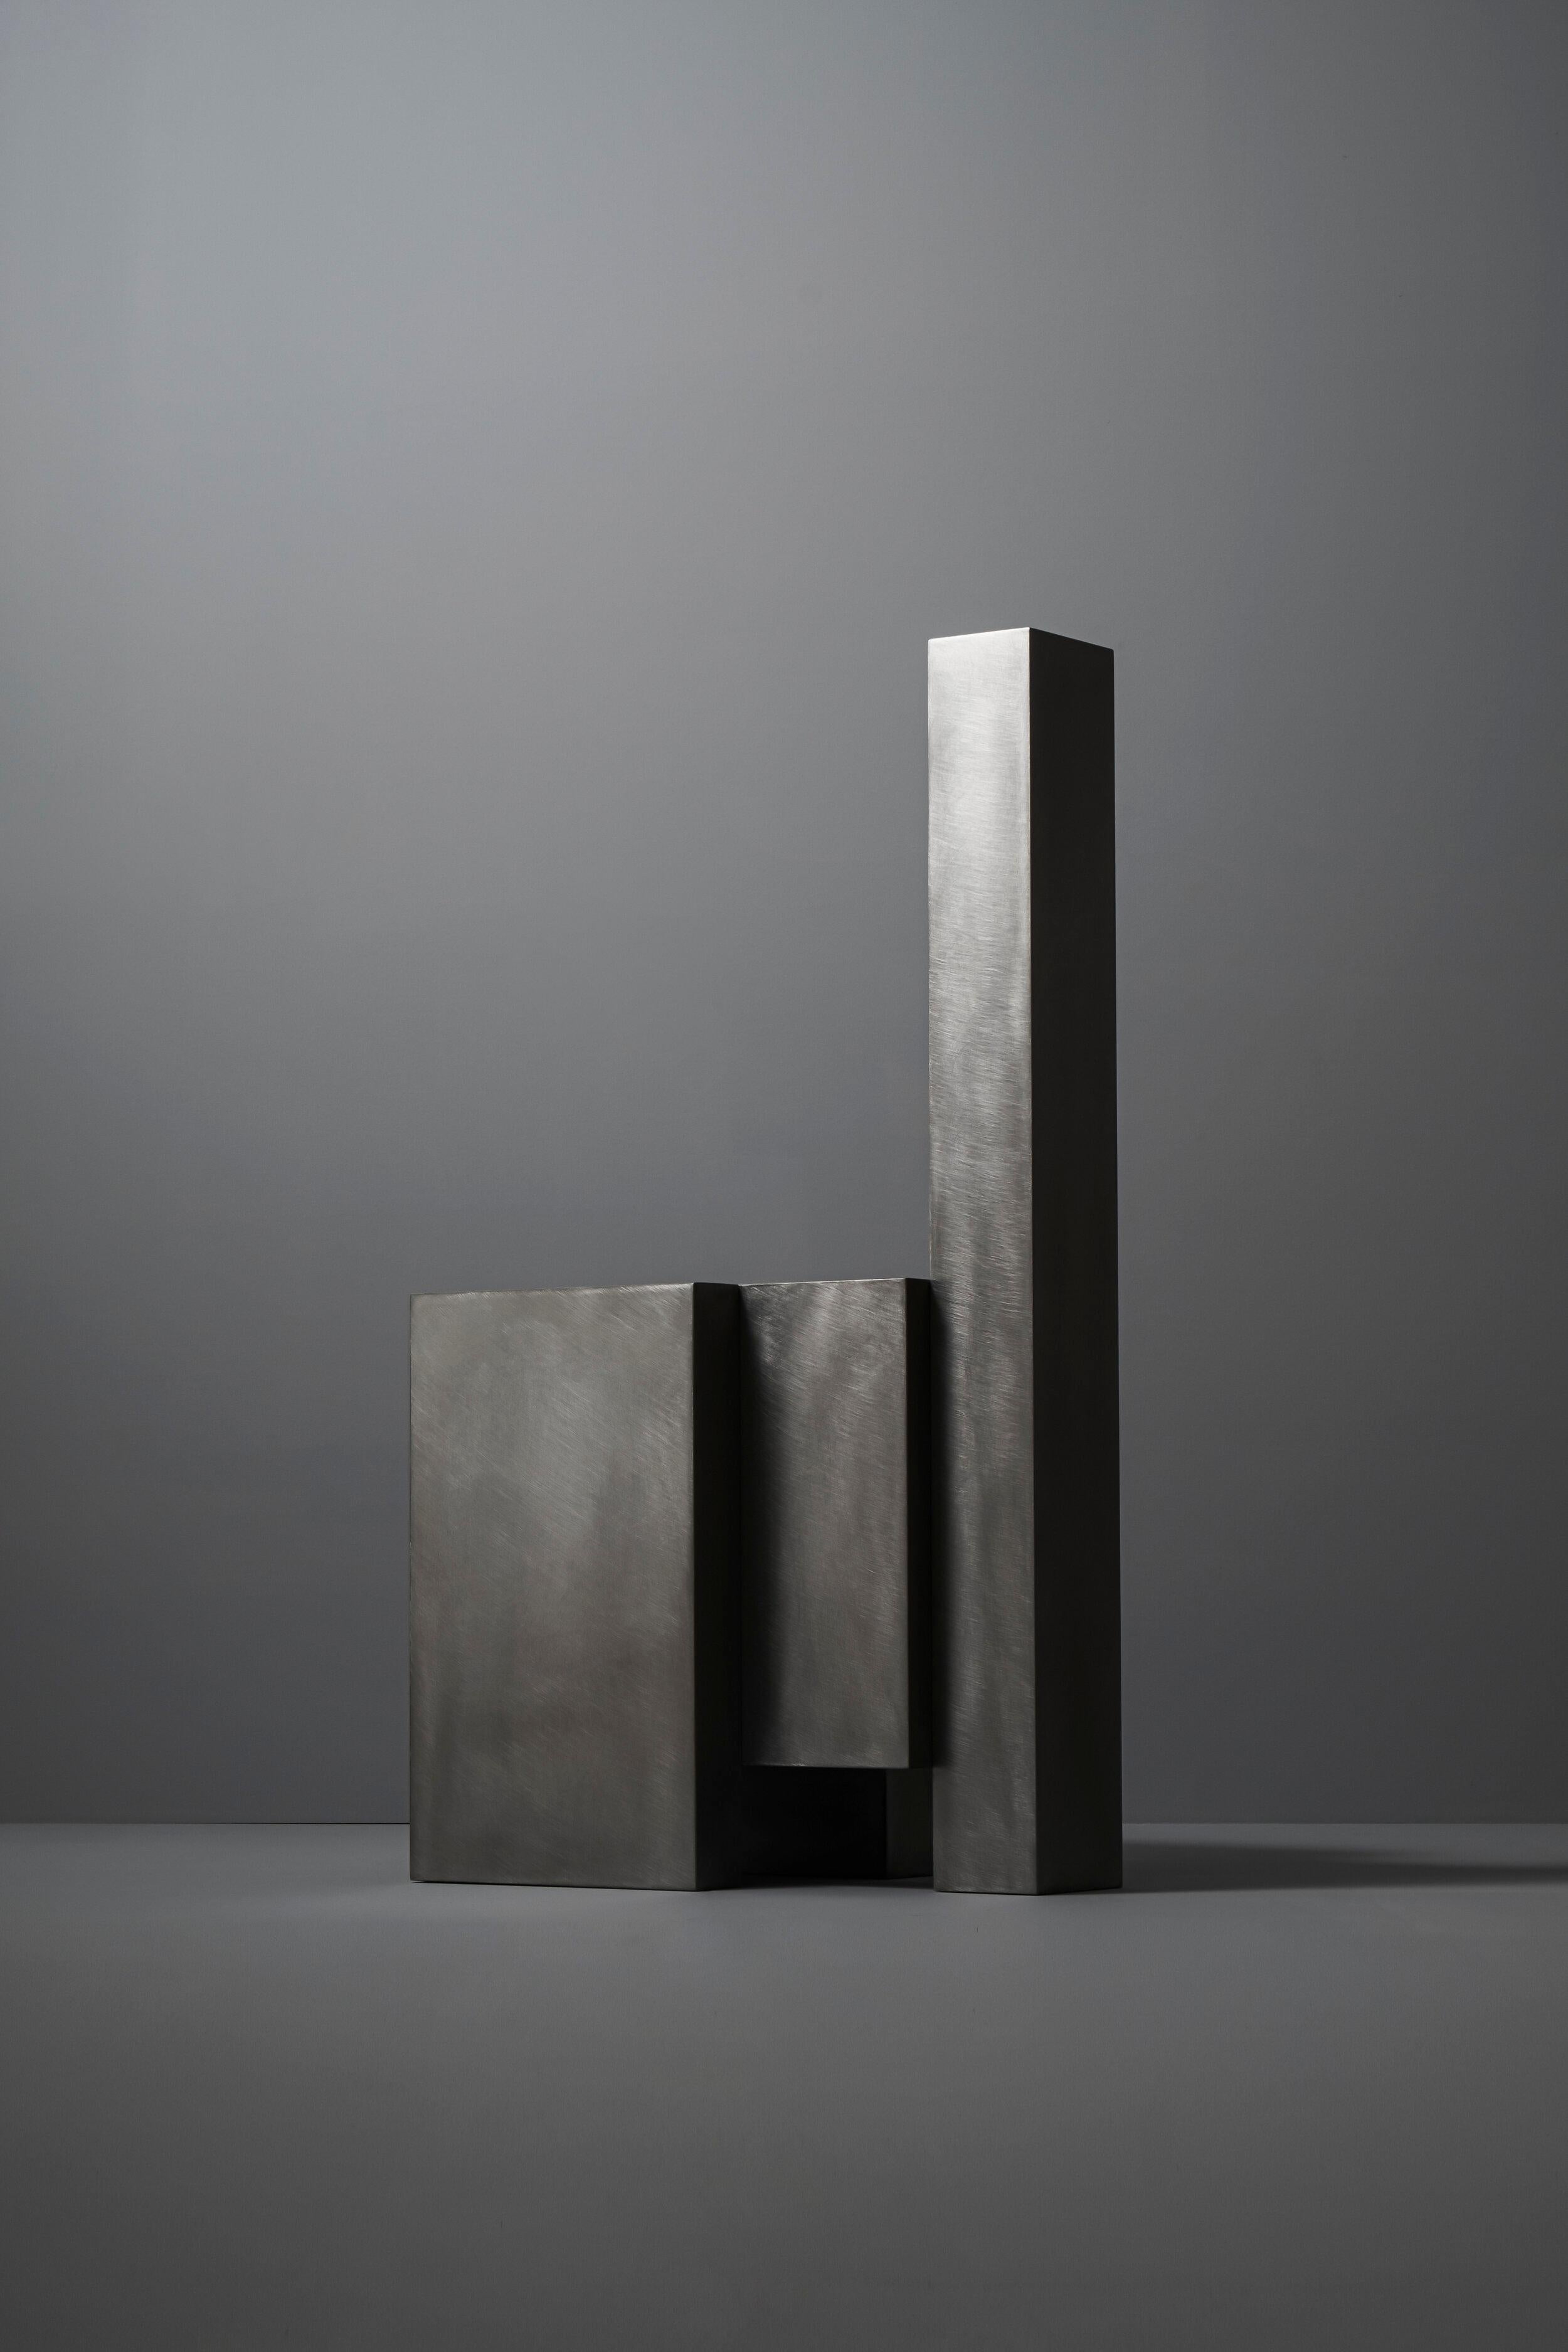 Layered steel seat VI by Hyungshin Hwang.
Dimensions: D 33 x W 51 x H 93 cm.
Materials: stainless steel.

Layered Series is the main theme and concept of work of Hwang, who continues his experiment which is based on architectural composition of